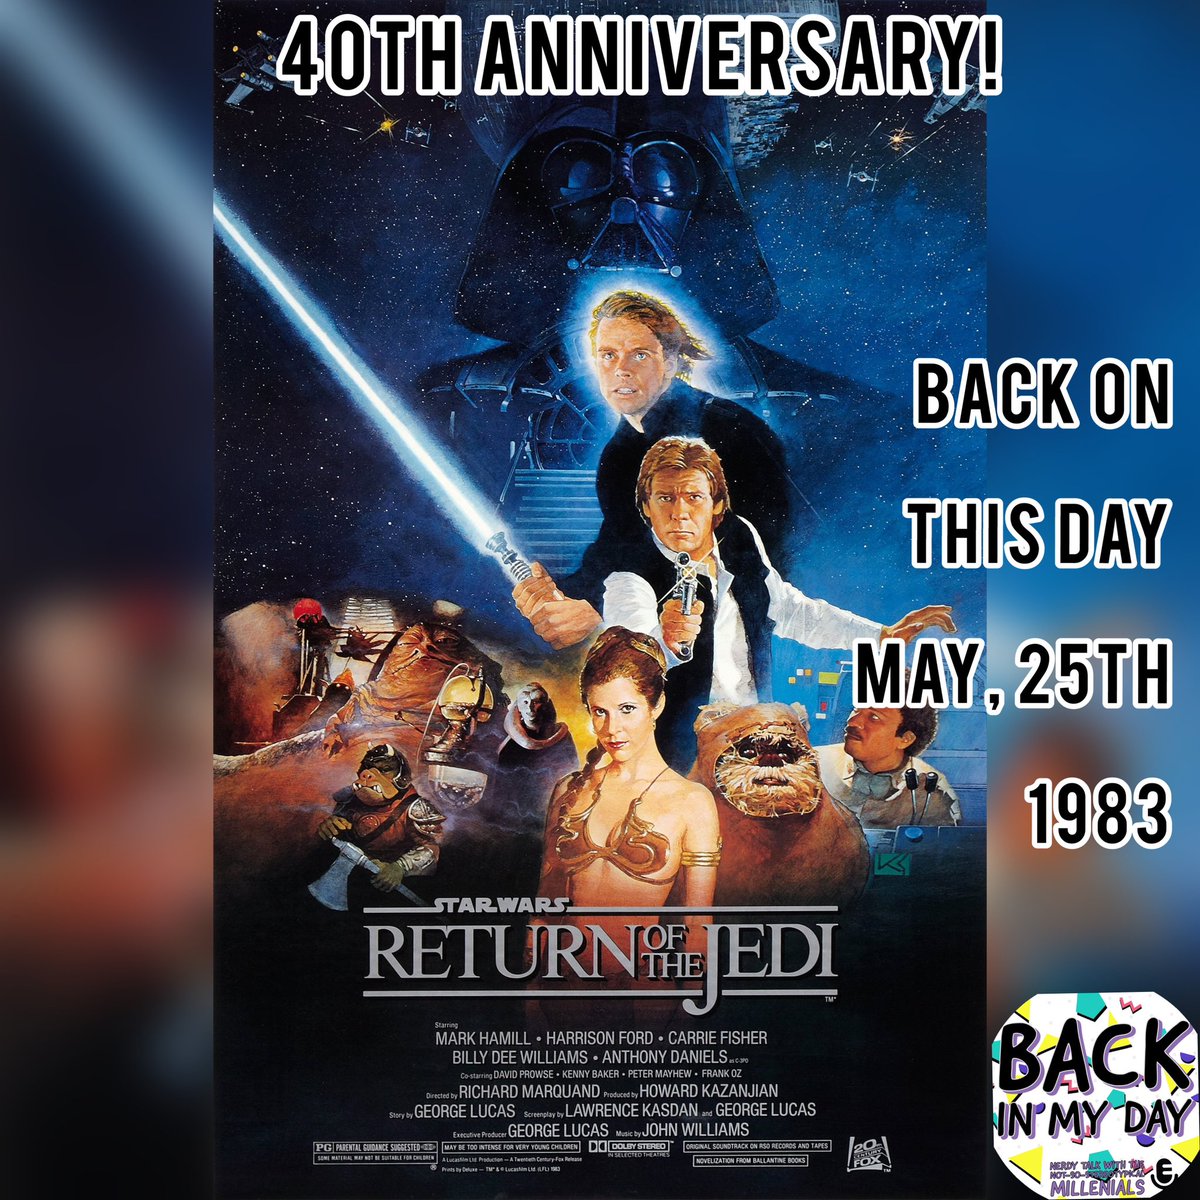 Happy 40th anniversary to the release of Return of the Jedi. At least one of our host’s favourite #StarWars movie, and a movie we reviewed back on episode 46 of the podcast. #ReturnoftheJedi 

open.spotify.com/episode/1eOy1v…